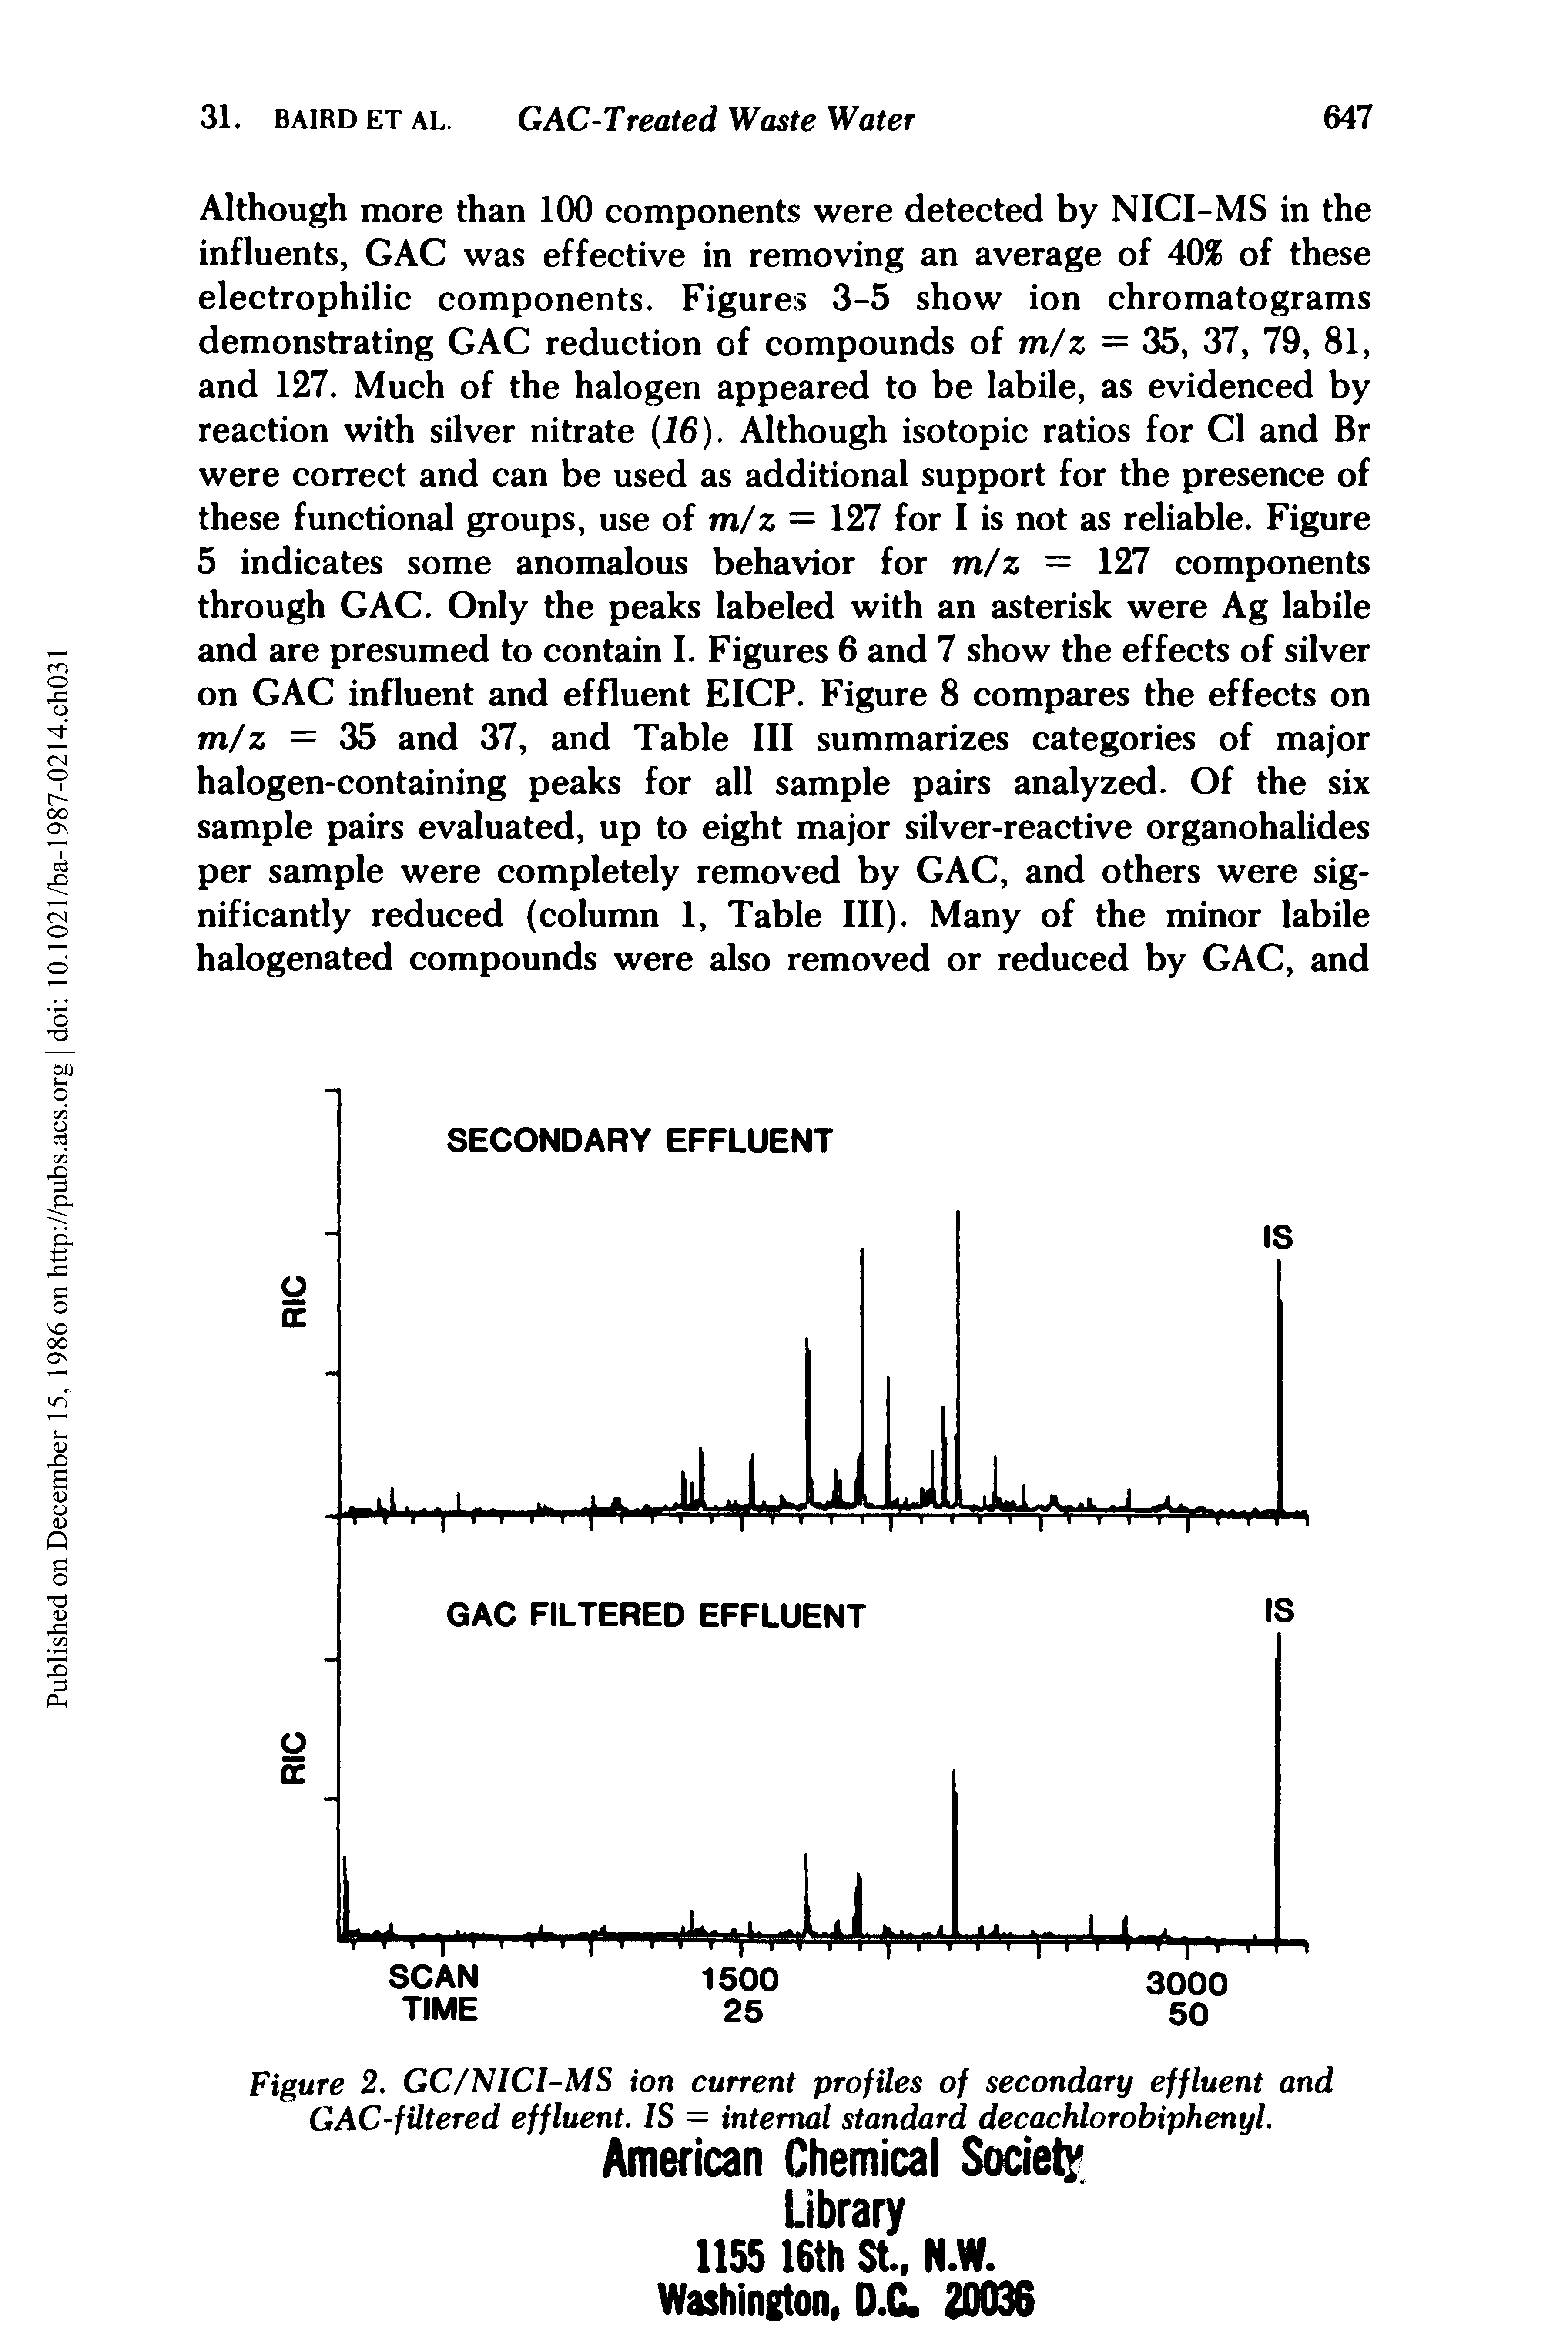 Figure 2. GC/NICI-MS ion current profiles of secondary effluent and GAC-fUtered effluent. IS = internal standard decachlorobiphenyl.